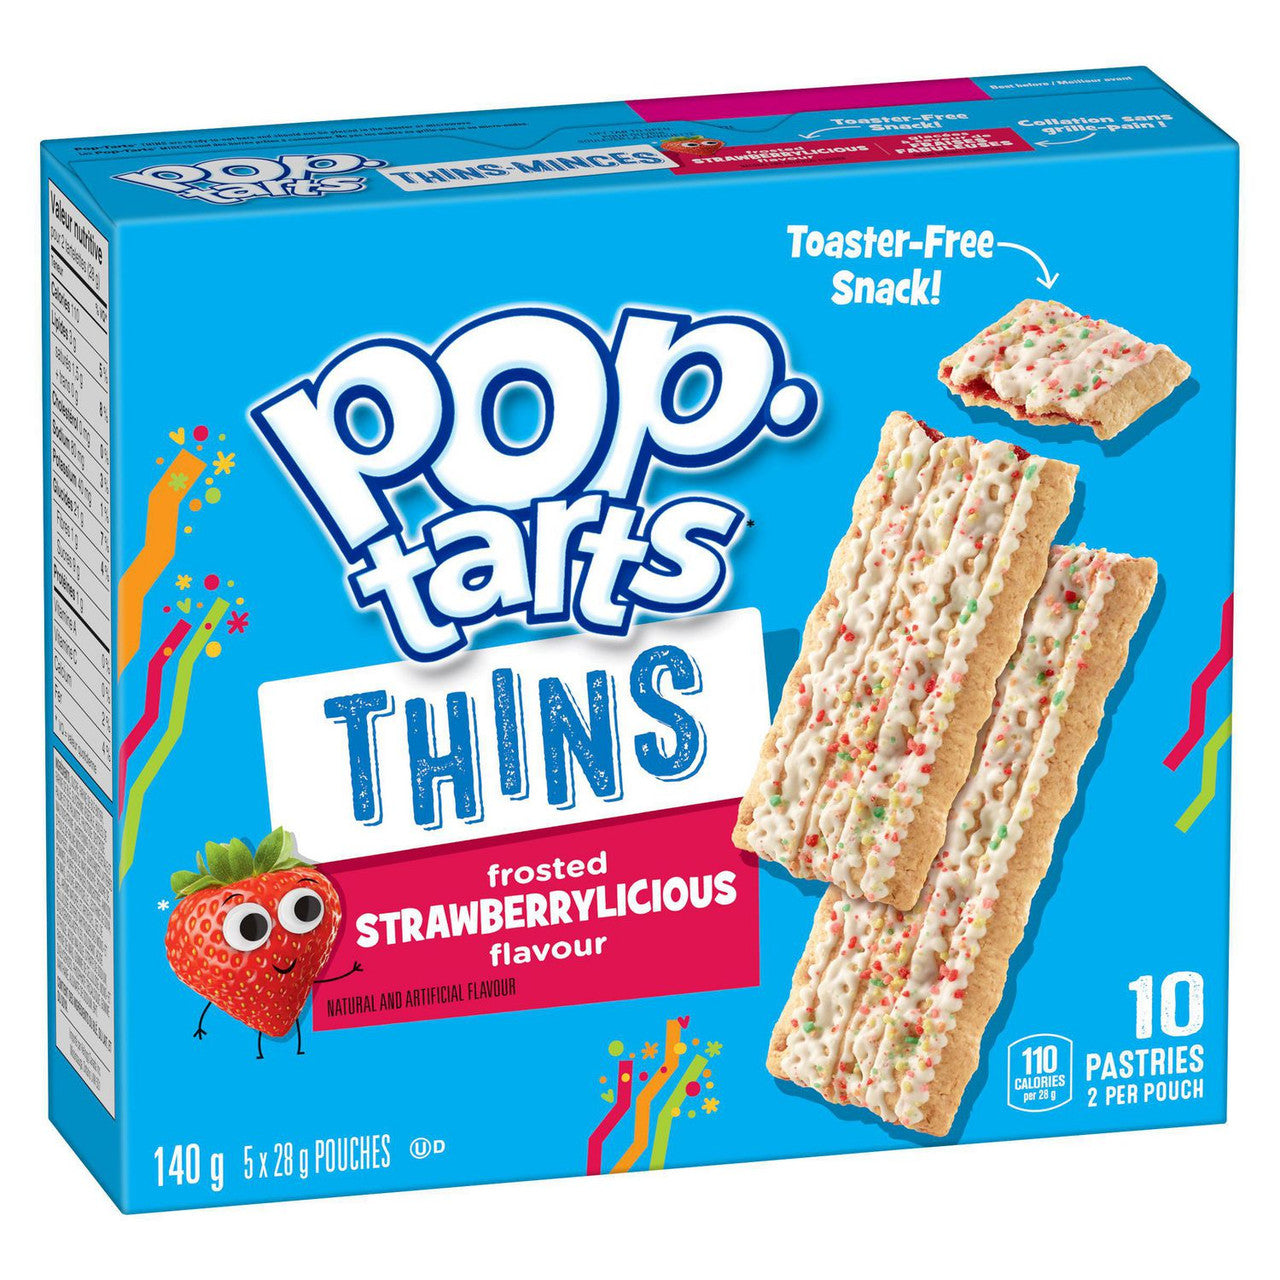 Pop-Tarts Thins, Frosted Strawberrylicious flavour, 140g/4.9 oz., {Imported from Canada}